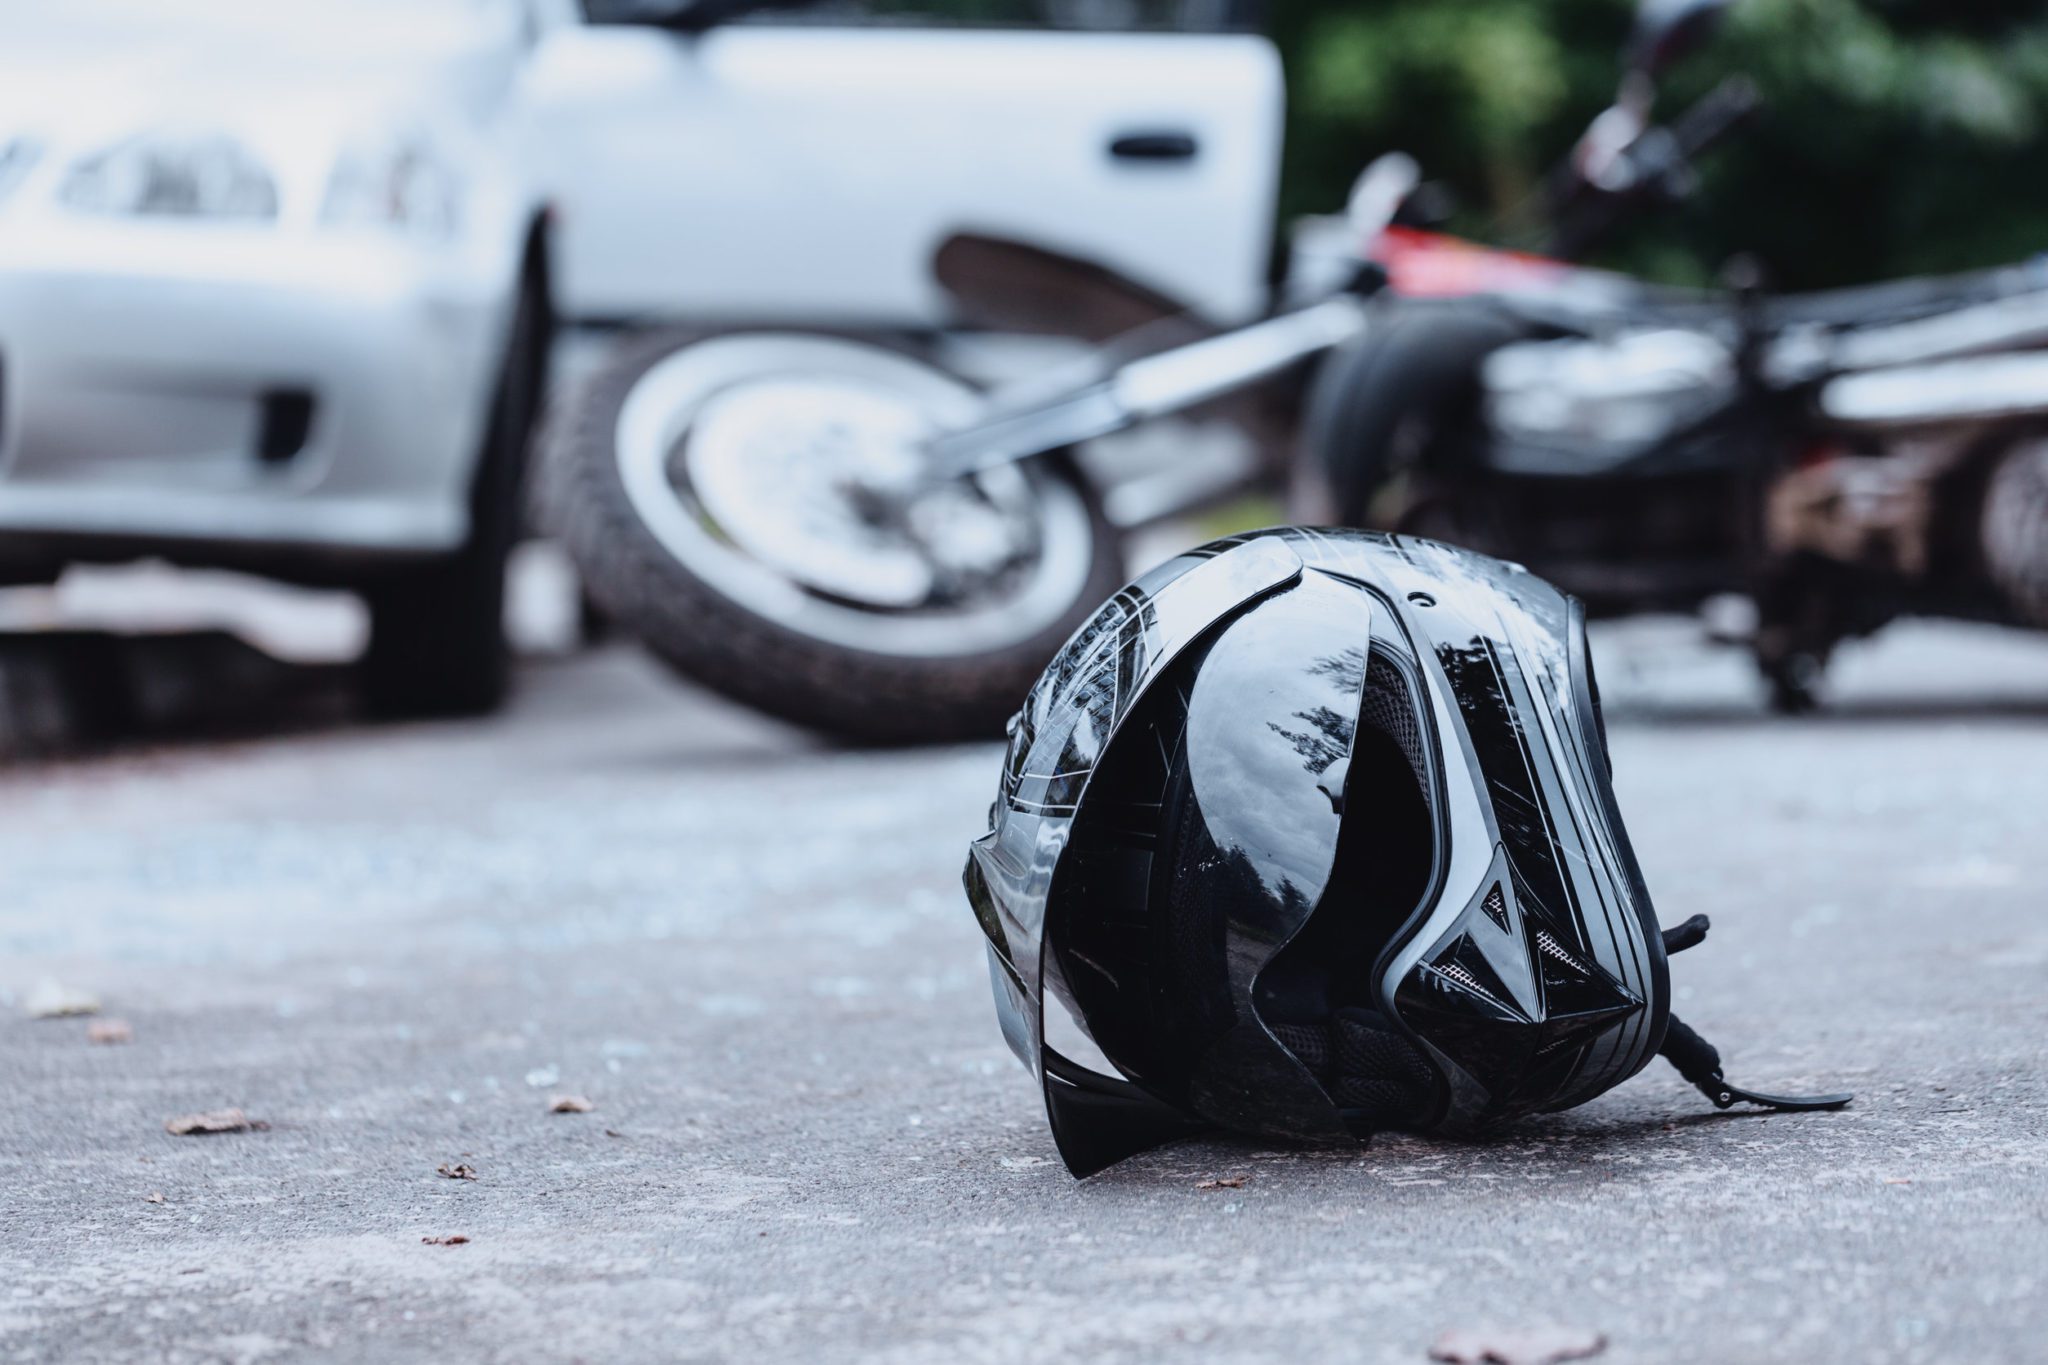 Motorcycle Accident Injuries and How to Claim Damages